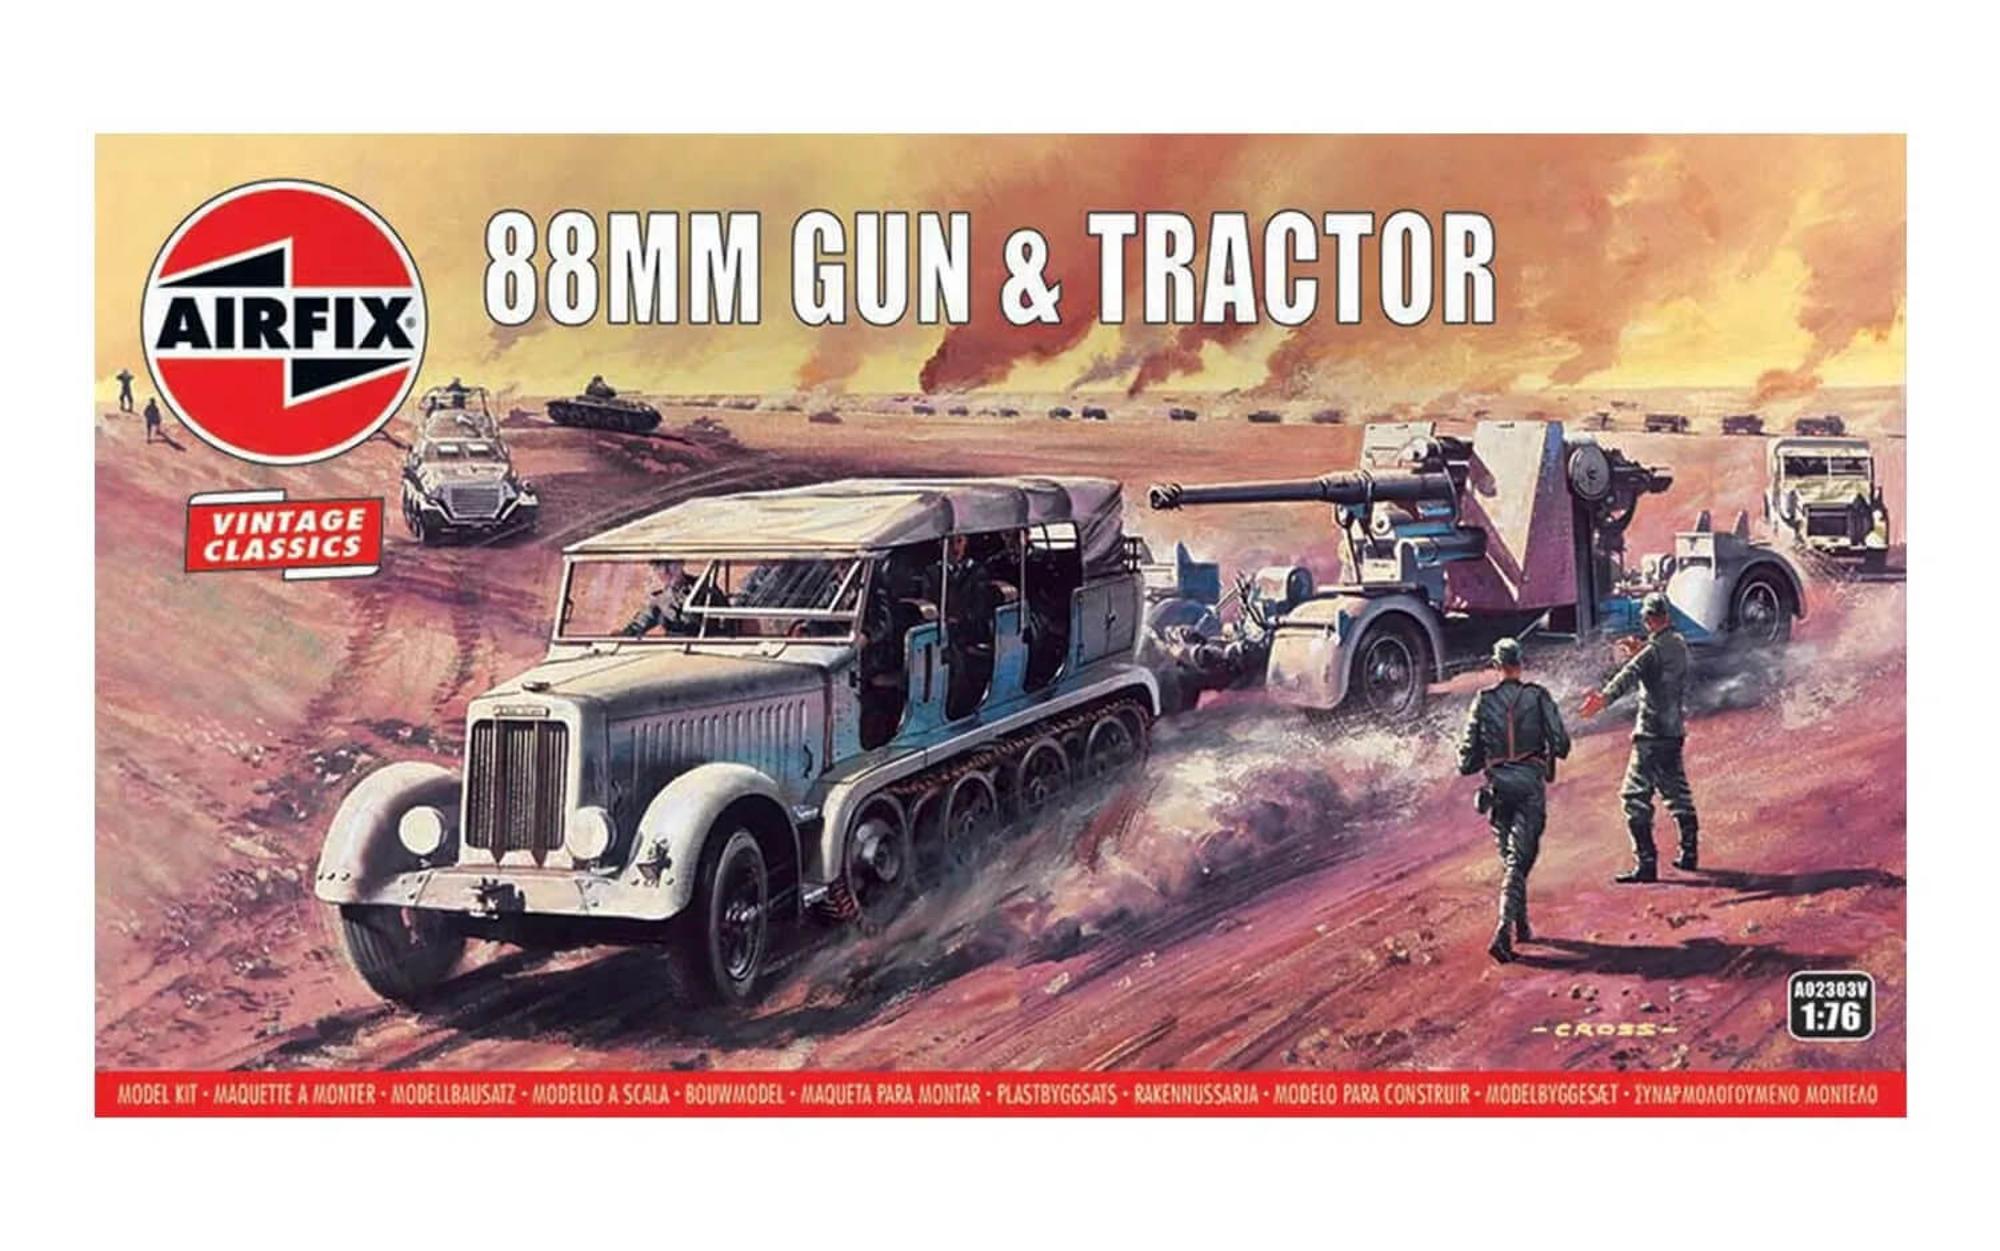 Airfix 88mm Gun and Tractor Model Kit